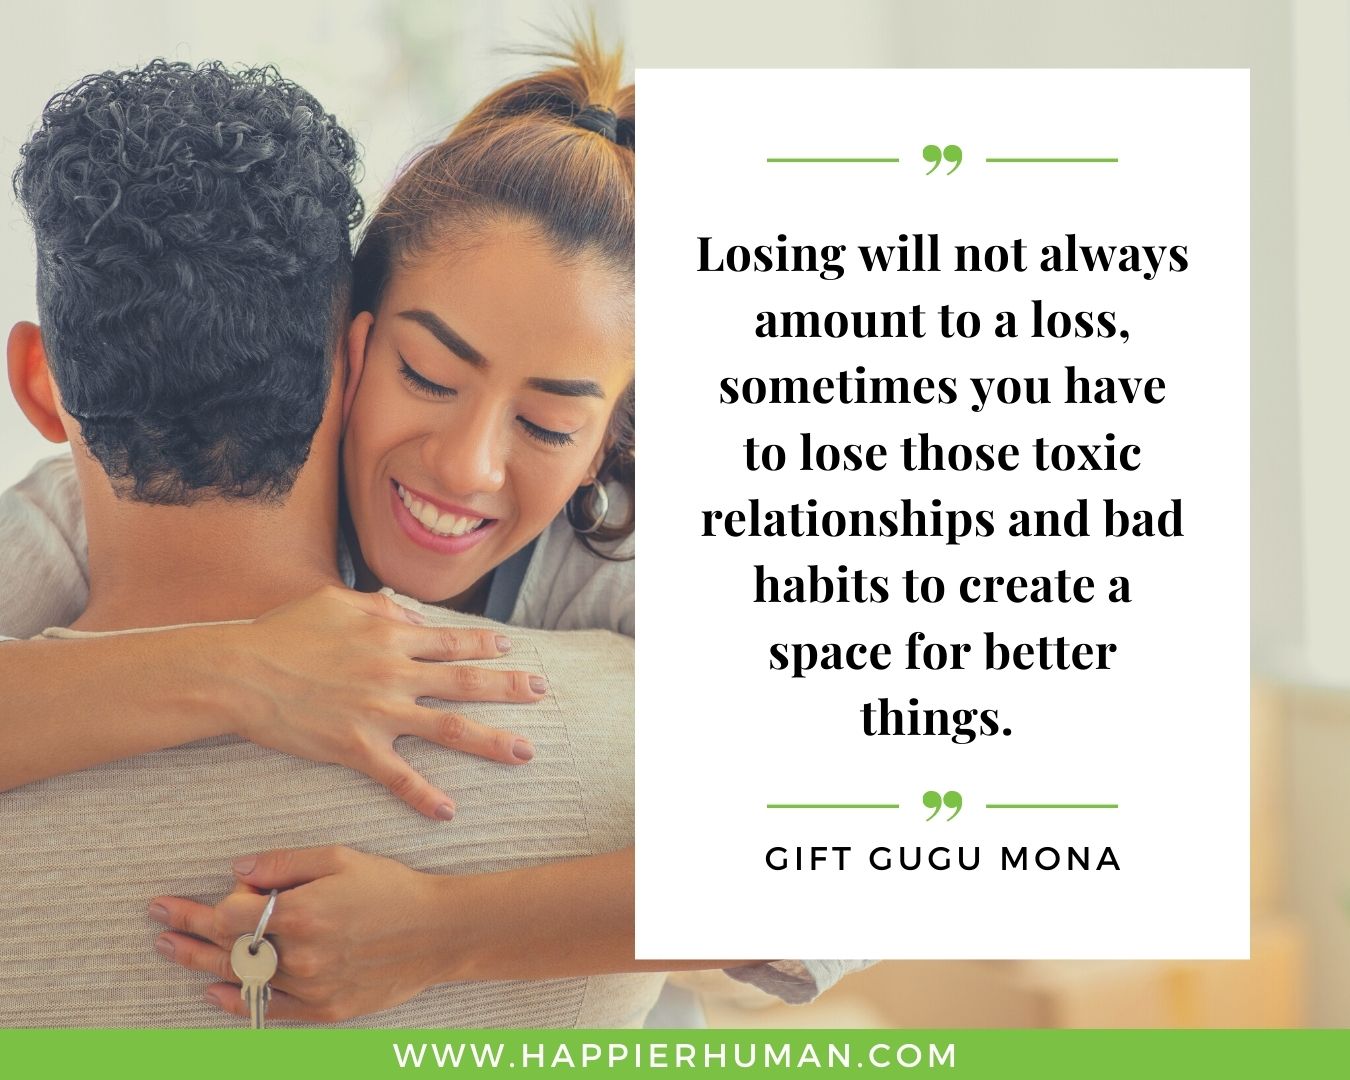 Toxic People Quotes - “Losing will not always amount to a loss, sometimes you have to lose those toxic relationships and bad habits to create a space for better things.” – Gift Gugu Mona